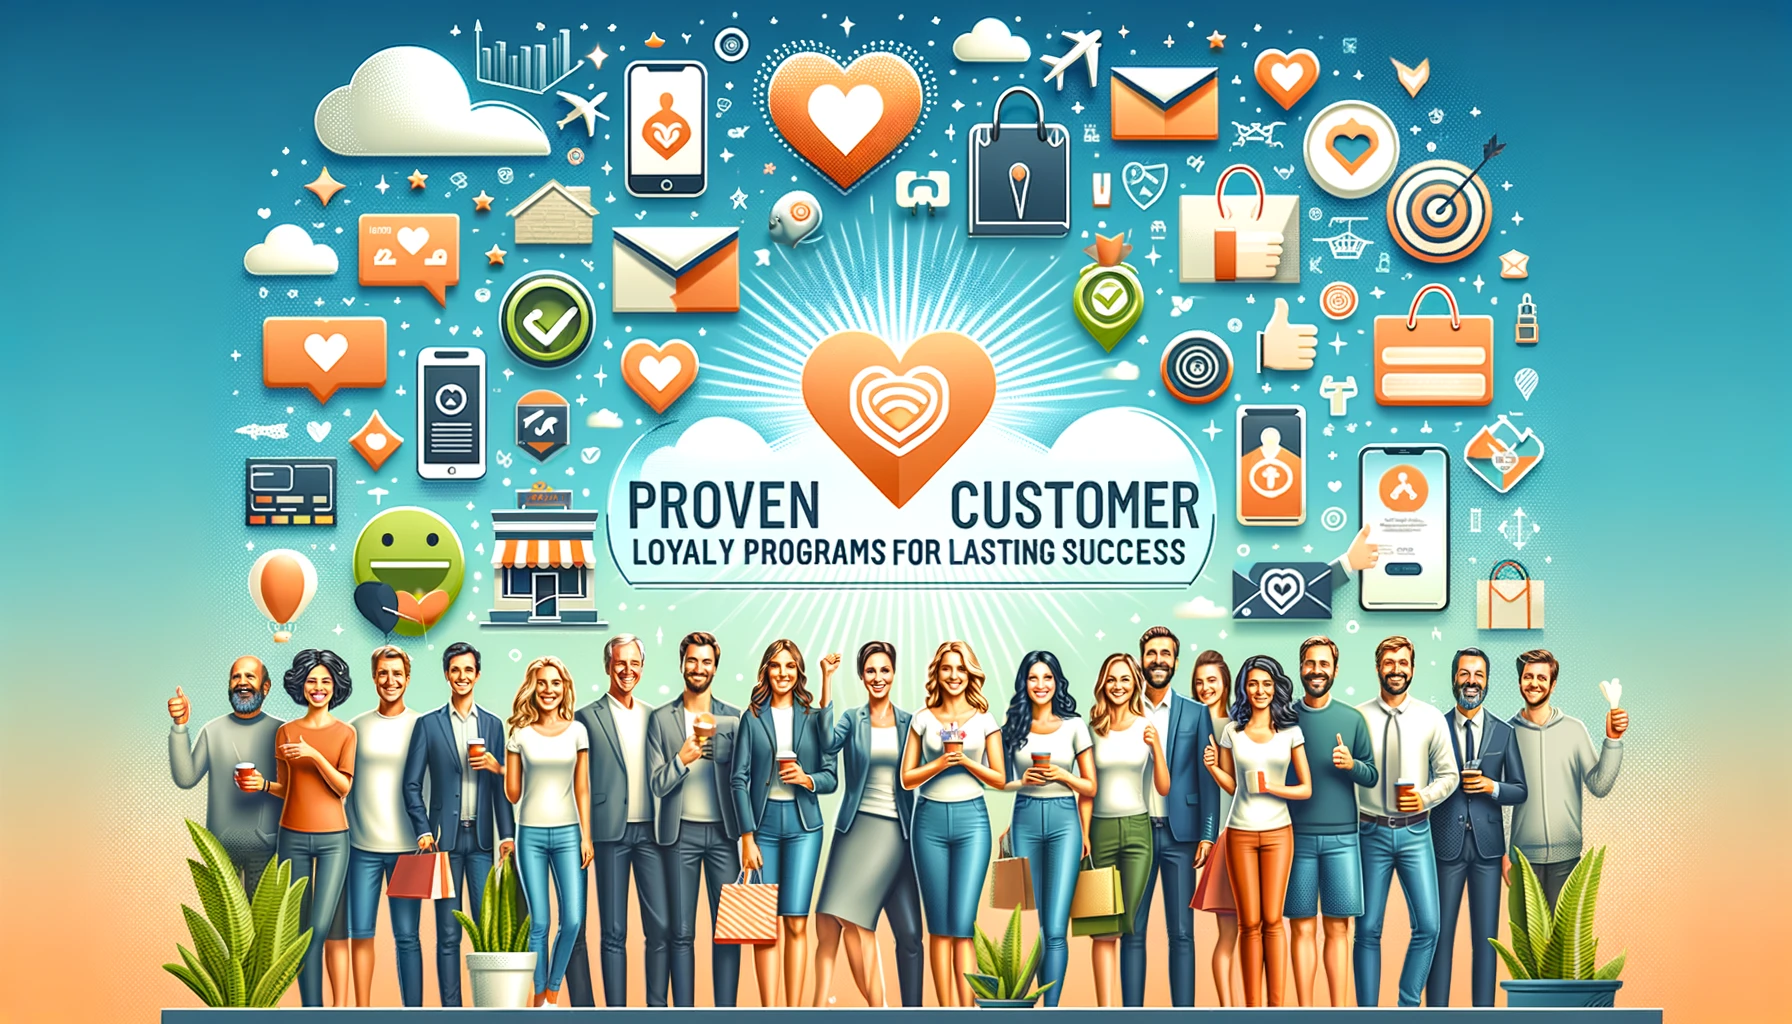 A diverse group of happy people engaging with various loyalty program elements like reward cards and mobile apps, in a vibrant community setting, symbolizing customer satisfaction and brand loyalty through Customer Loyalty Programs.